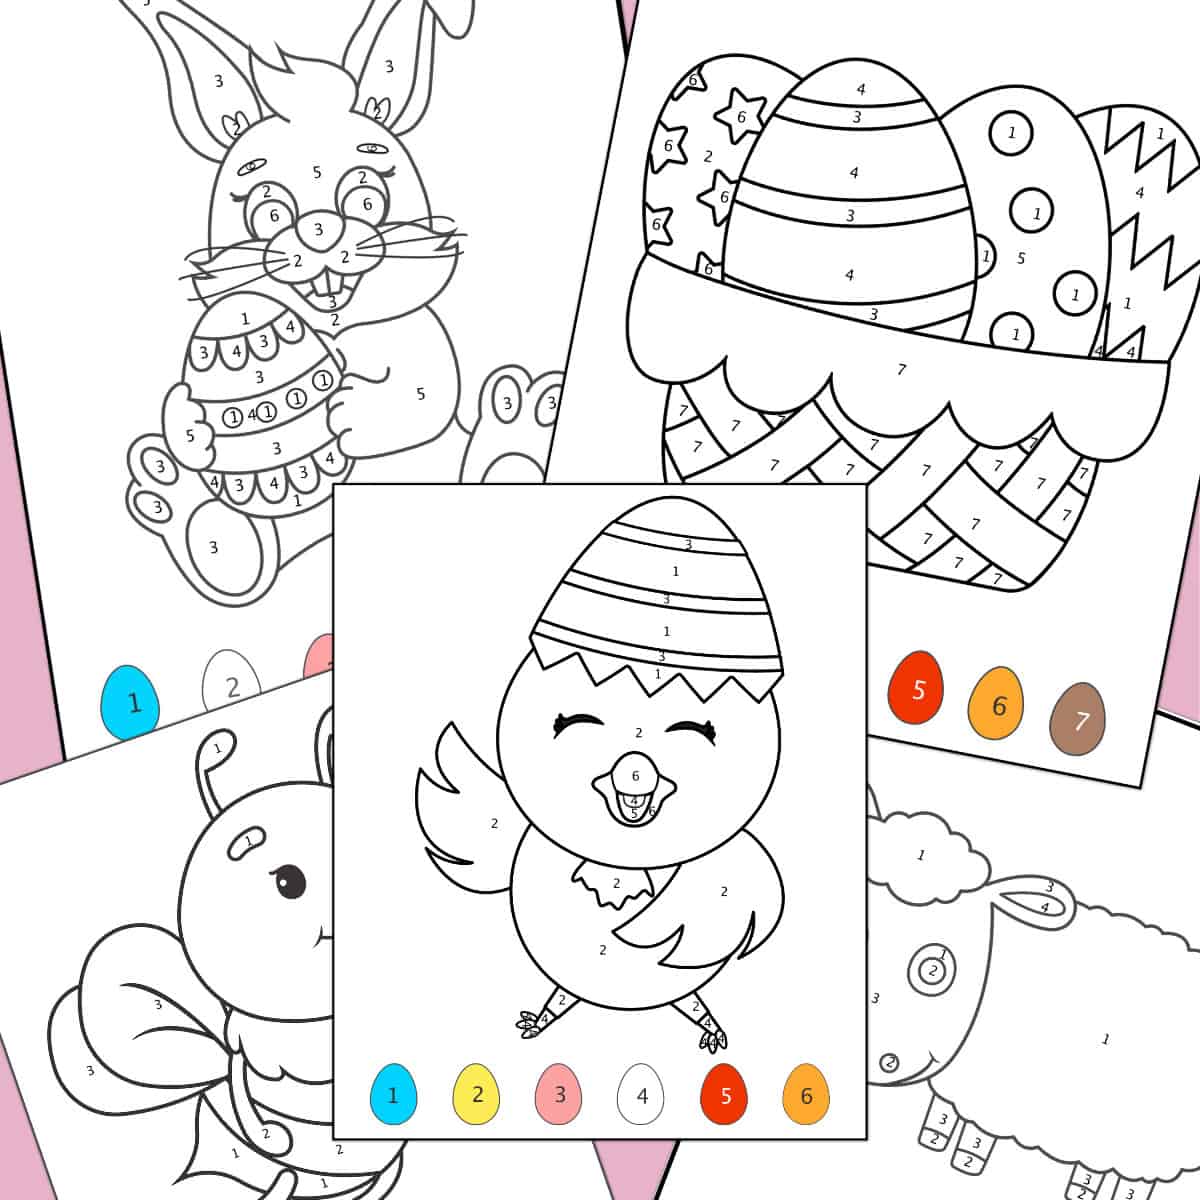 Multiple different pdfs of free Easter color by number sheets.